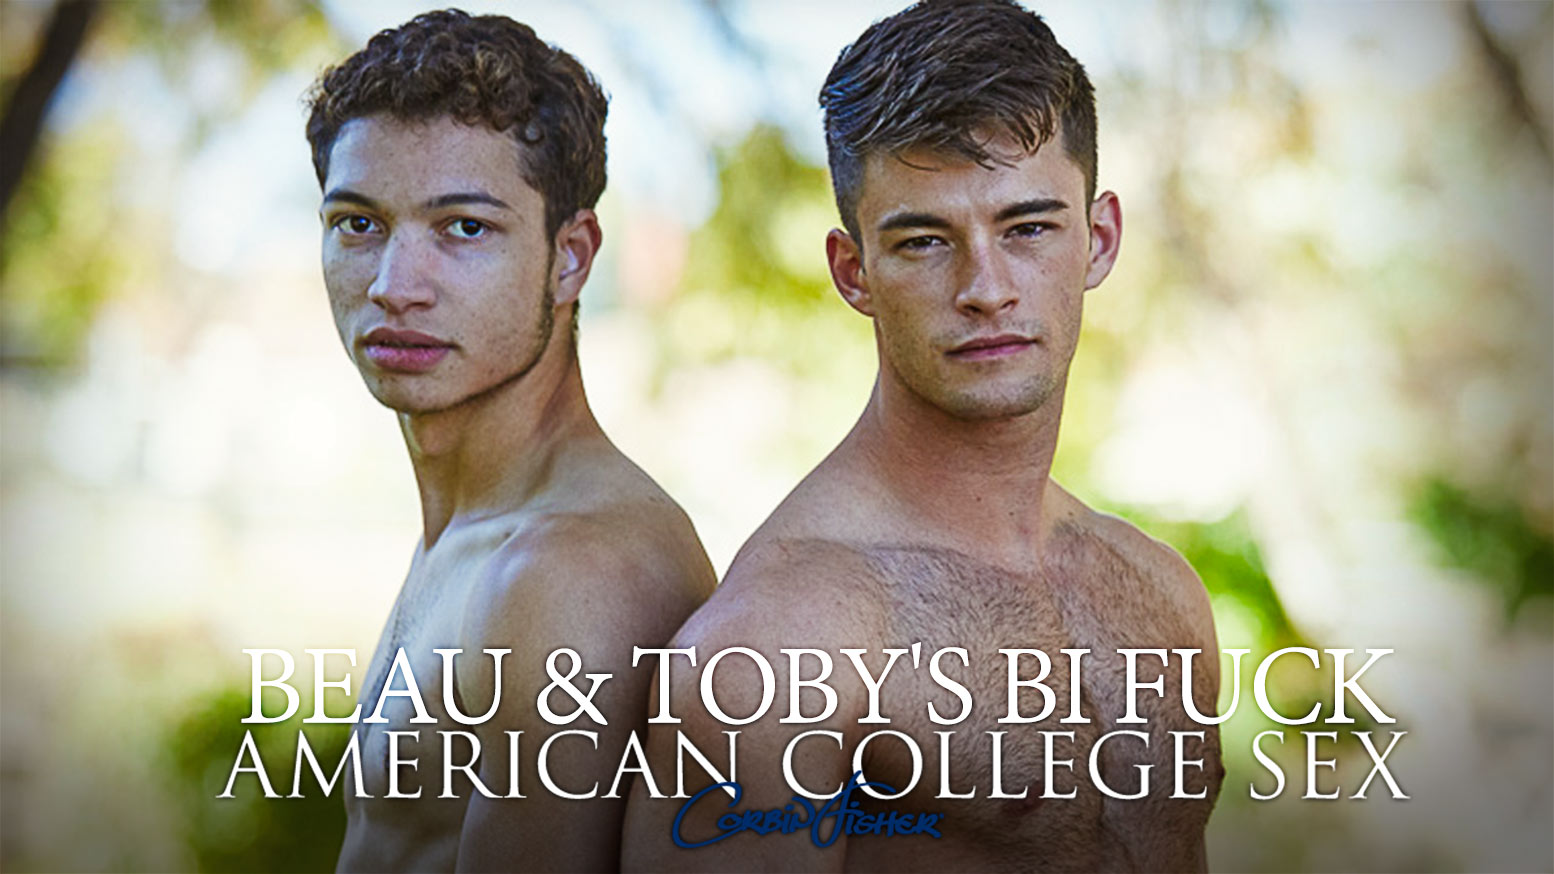 American College Sex Beau and Tobys Bi Fuck image